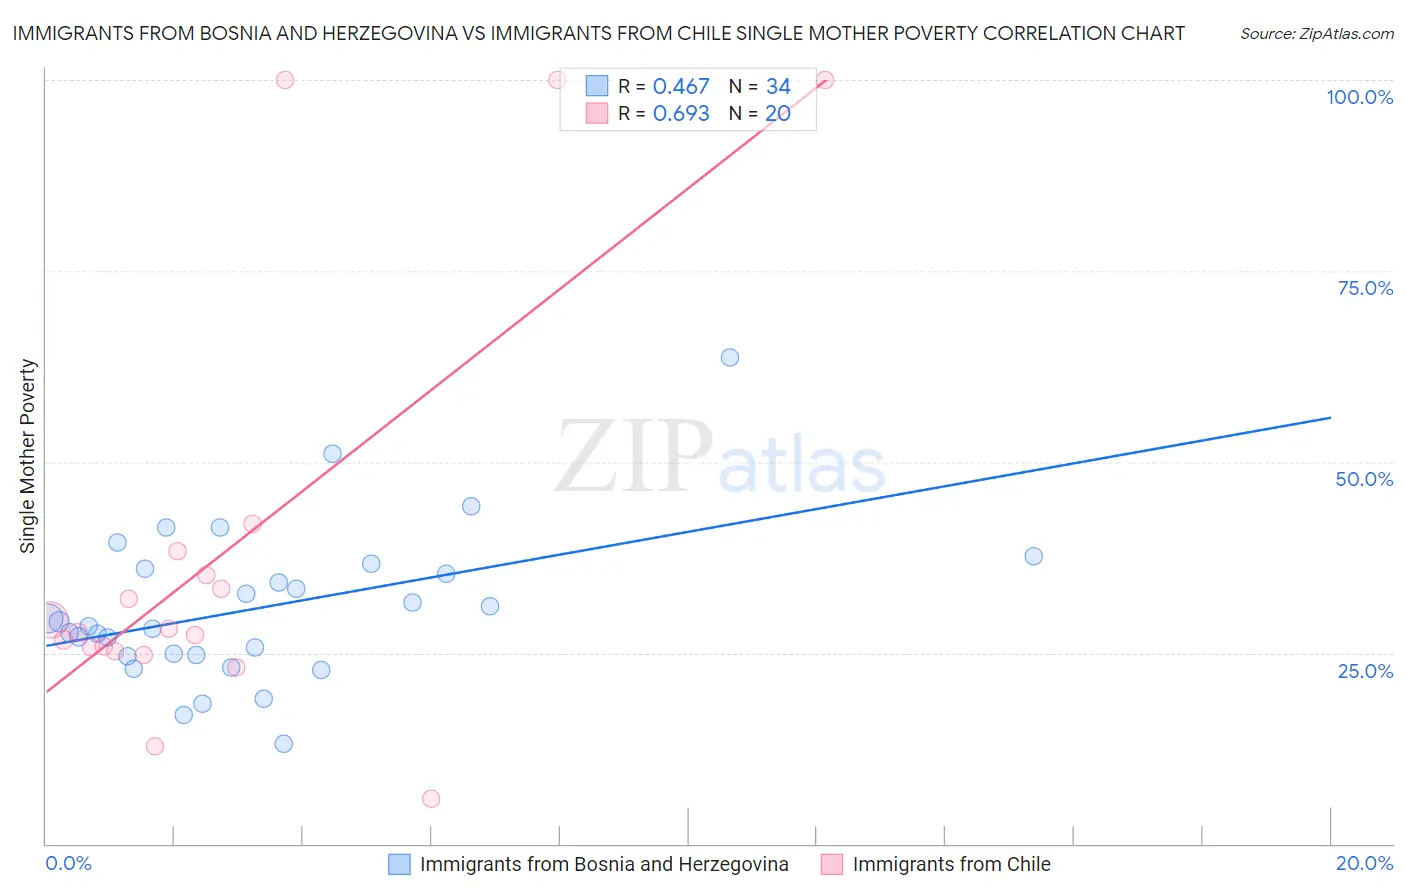 Immigrants from Bosnia and Herzegovina vs Immigrants from Chile Single Mother Poverty